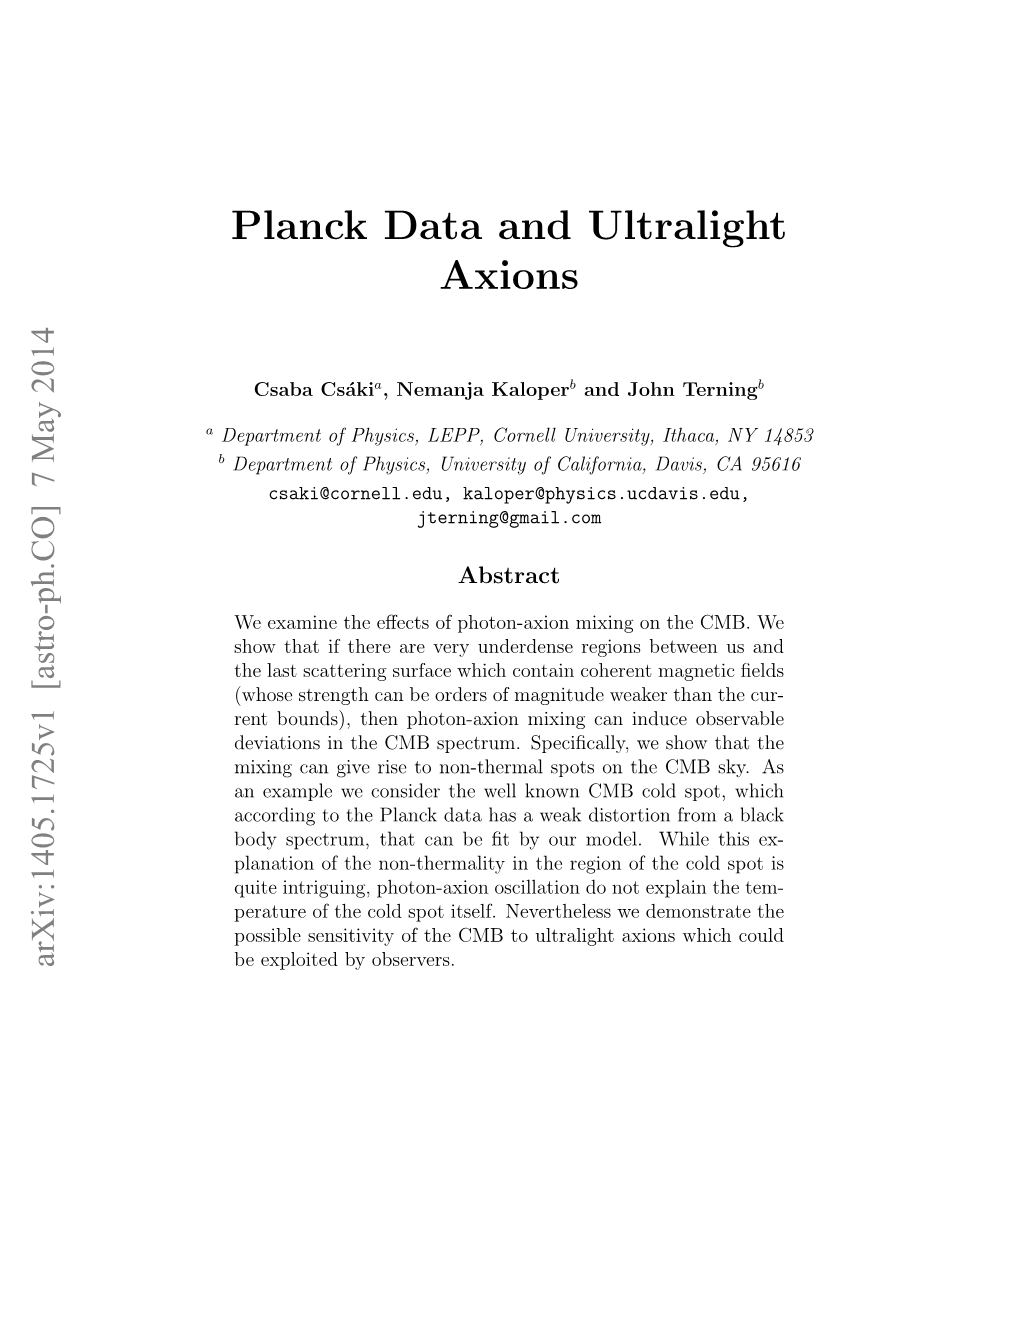 Planck Data and Ultralight Axions